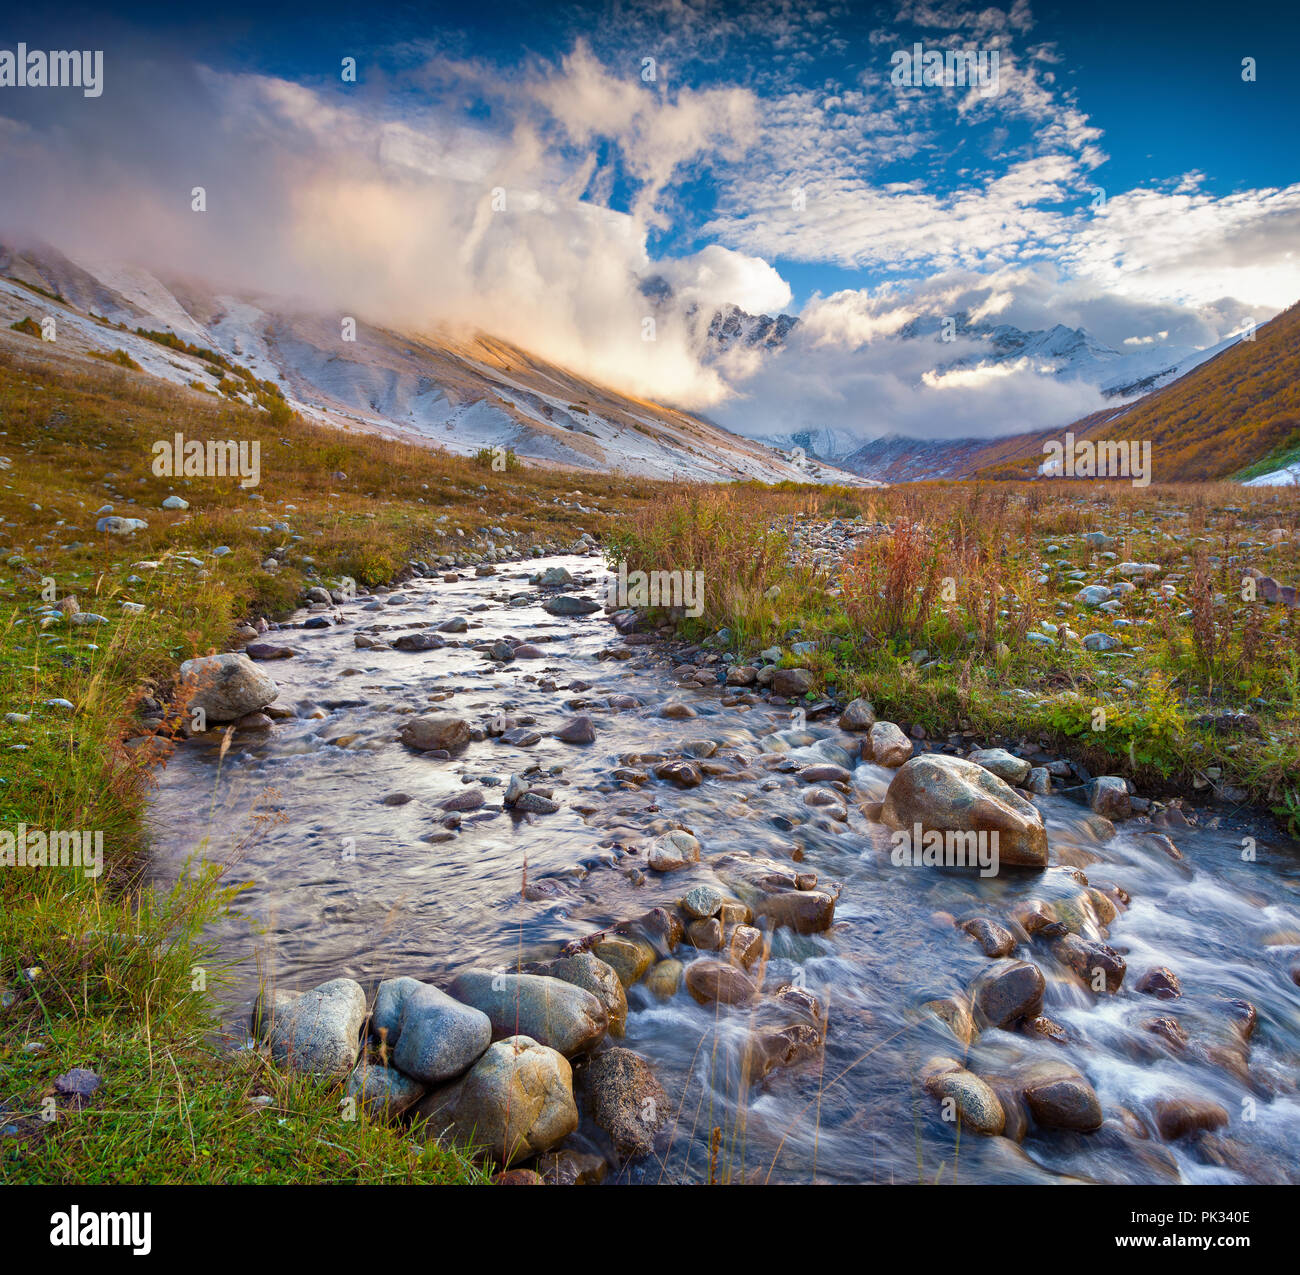 Colorful autumn morning in the Caucasus mountains with a pure mountain creek. Ushguli location, Upper Svaneti, Georgia, Europe. October 2015. Stock Photo